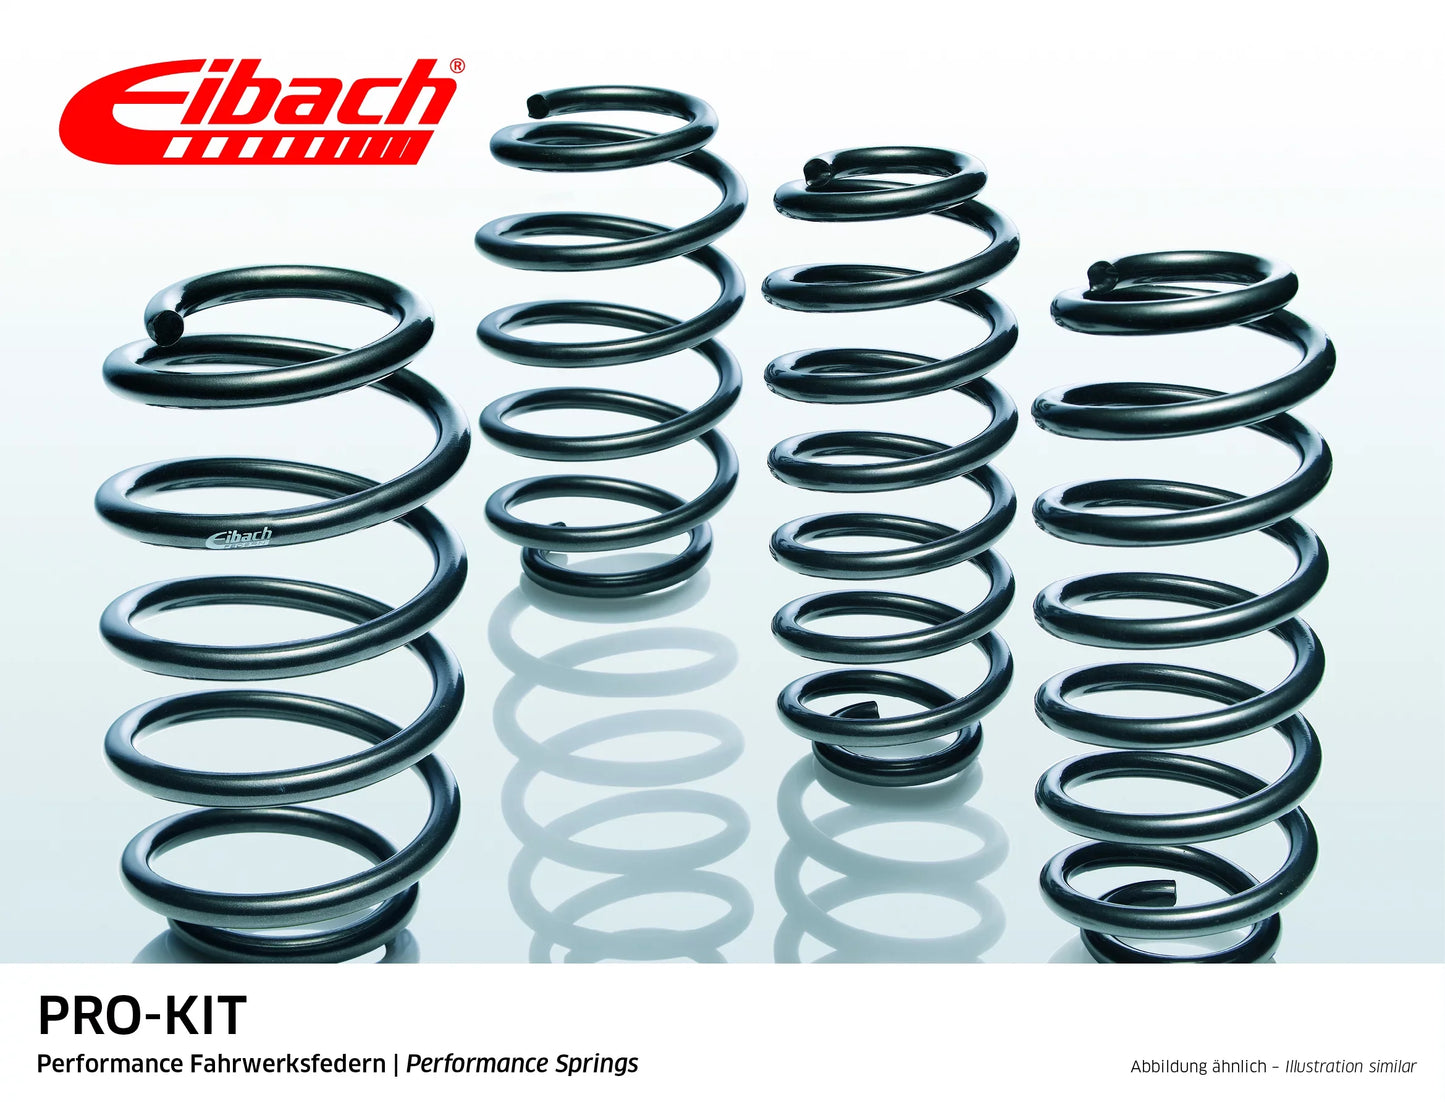 Eibach Pro-Kit Lowering Springs (E2050-140) at £239.59